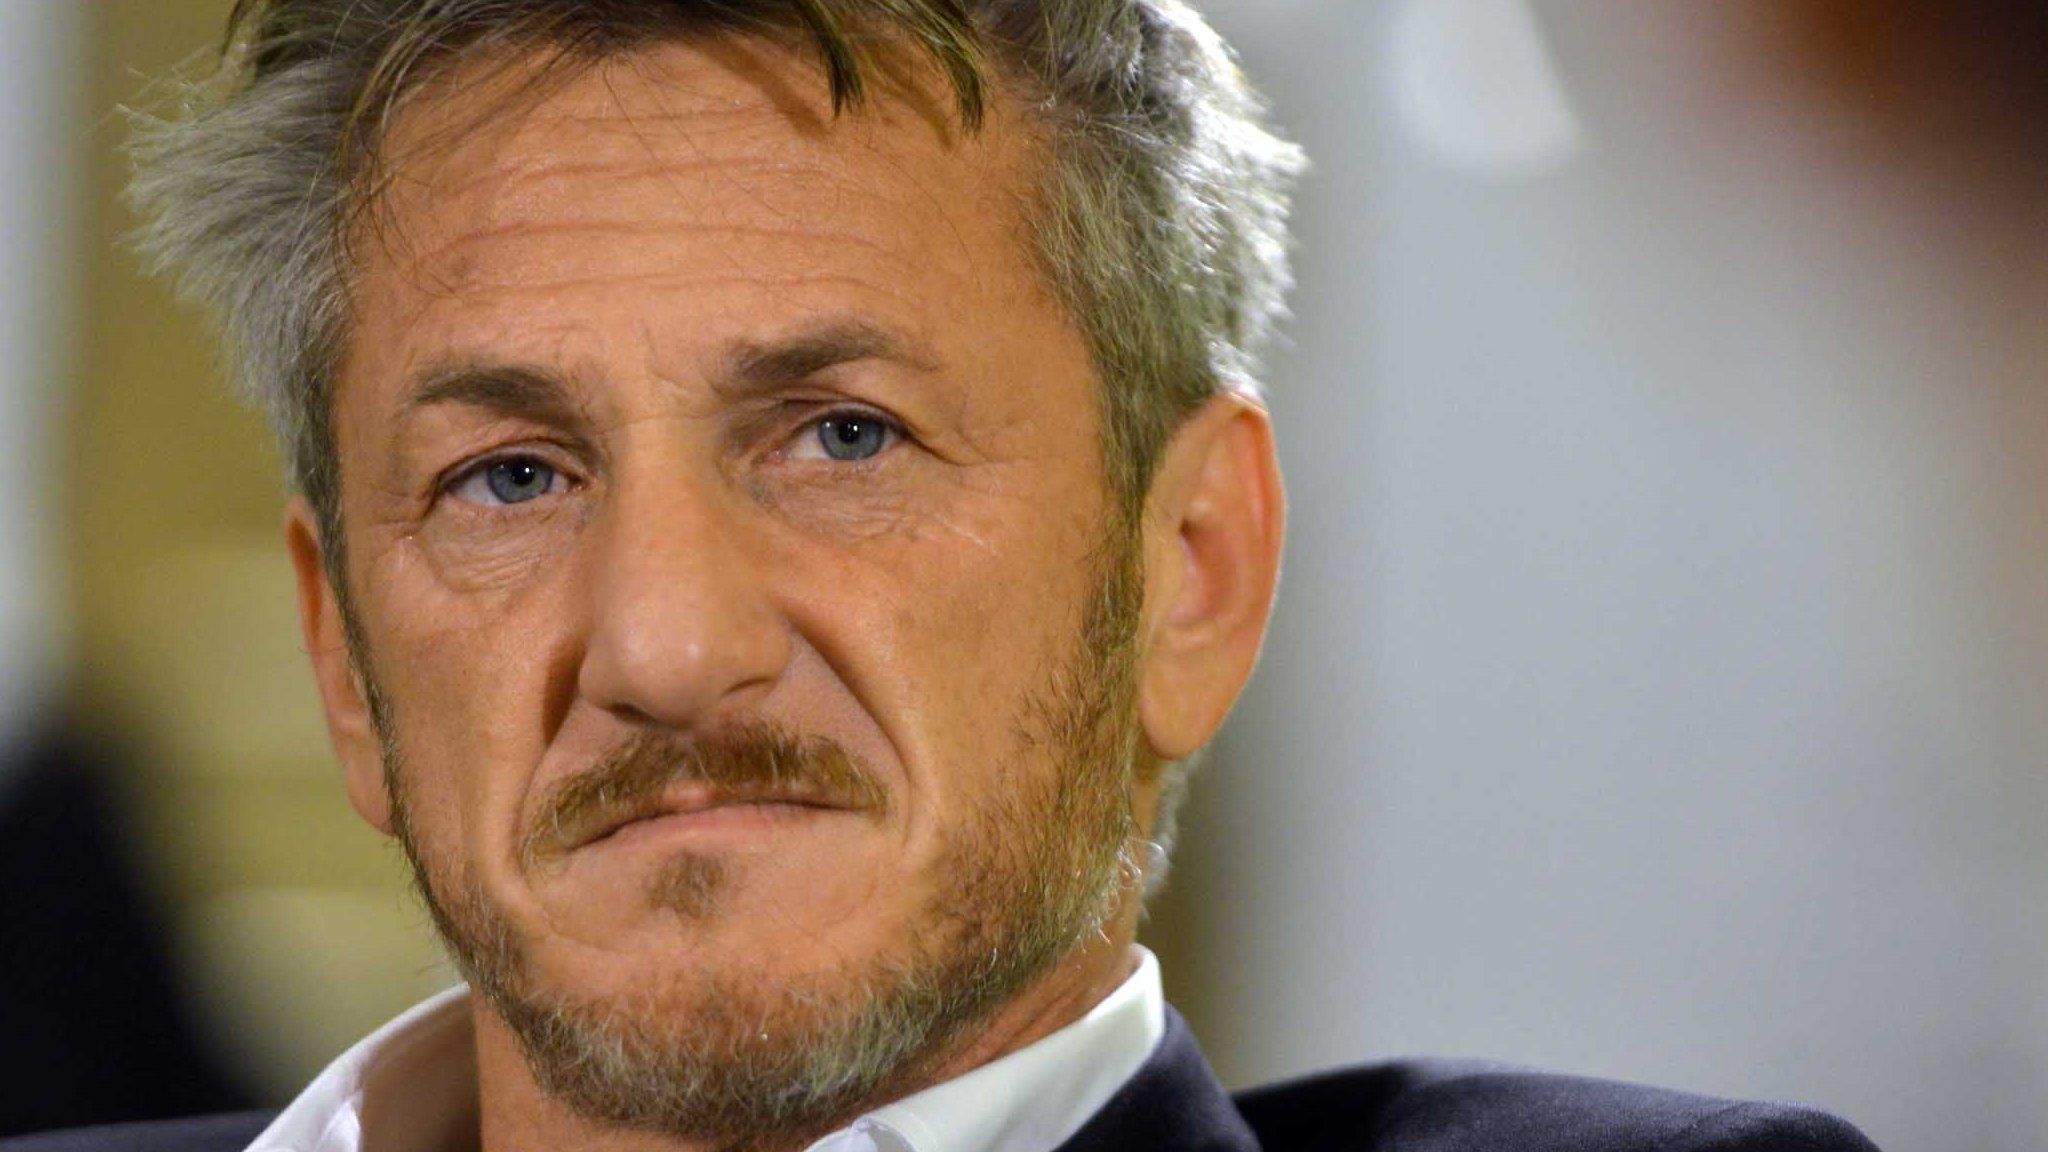 Sean Penn as he looks at someone during a discussion